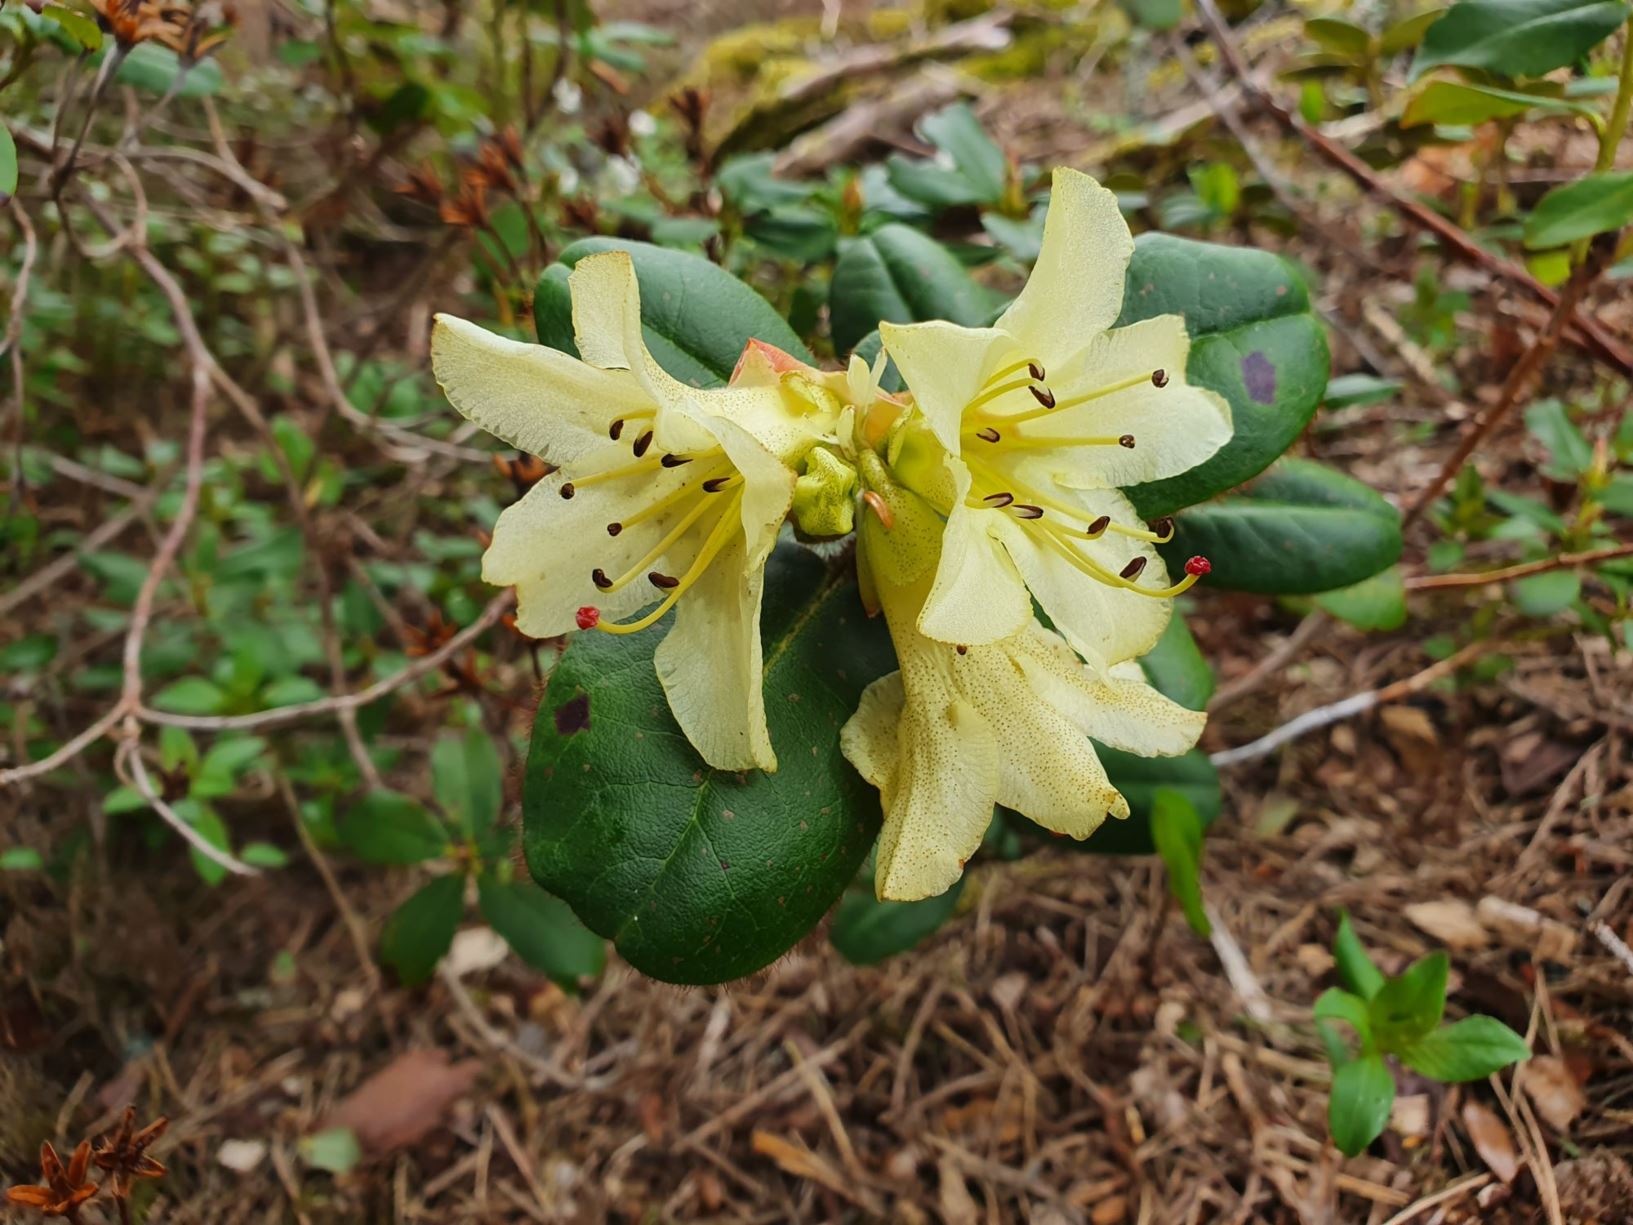 Rhododendron changii